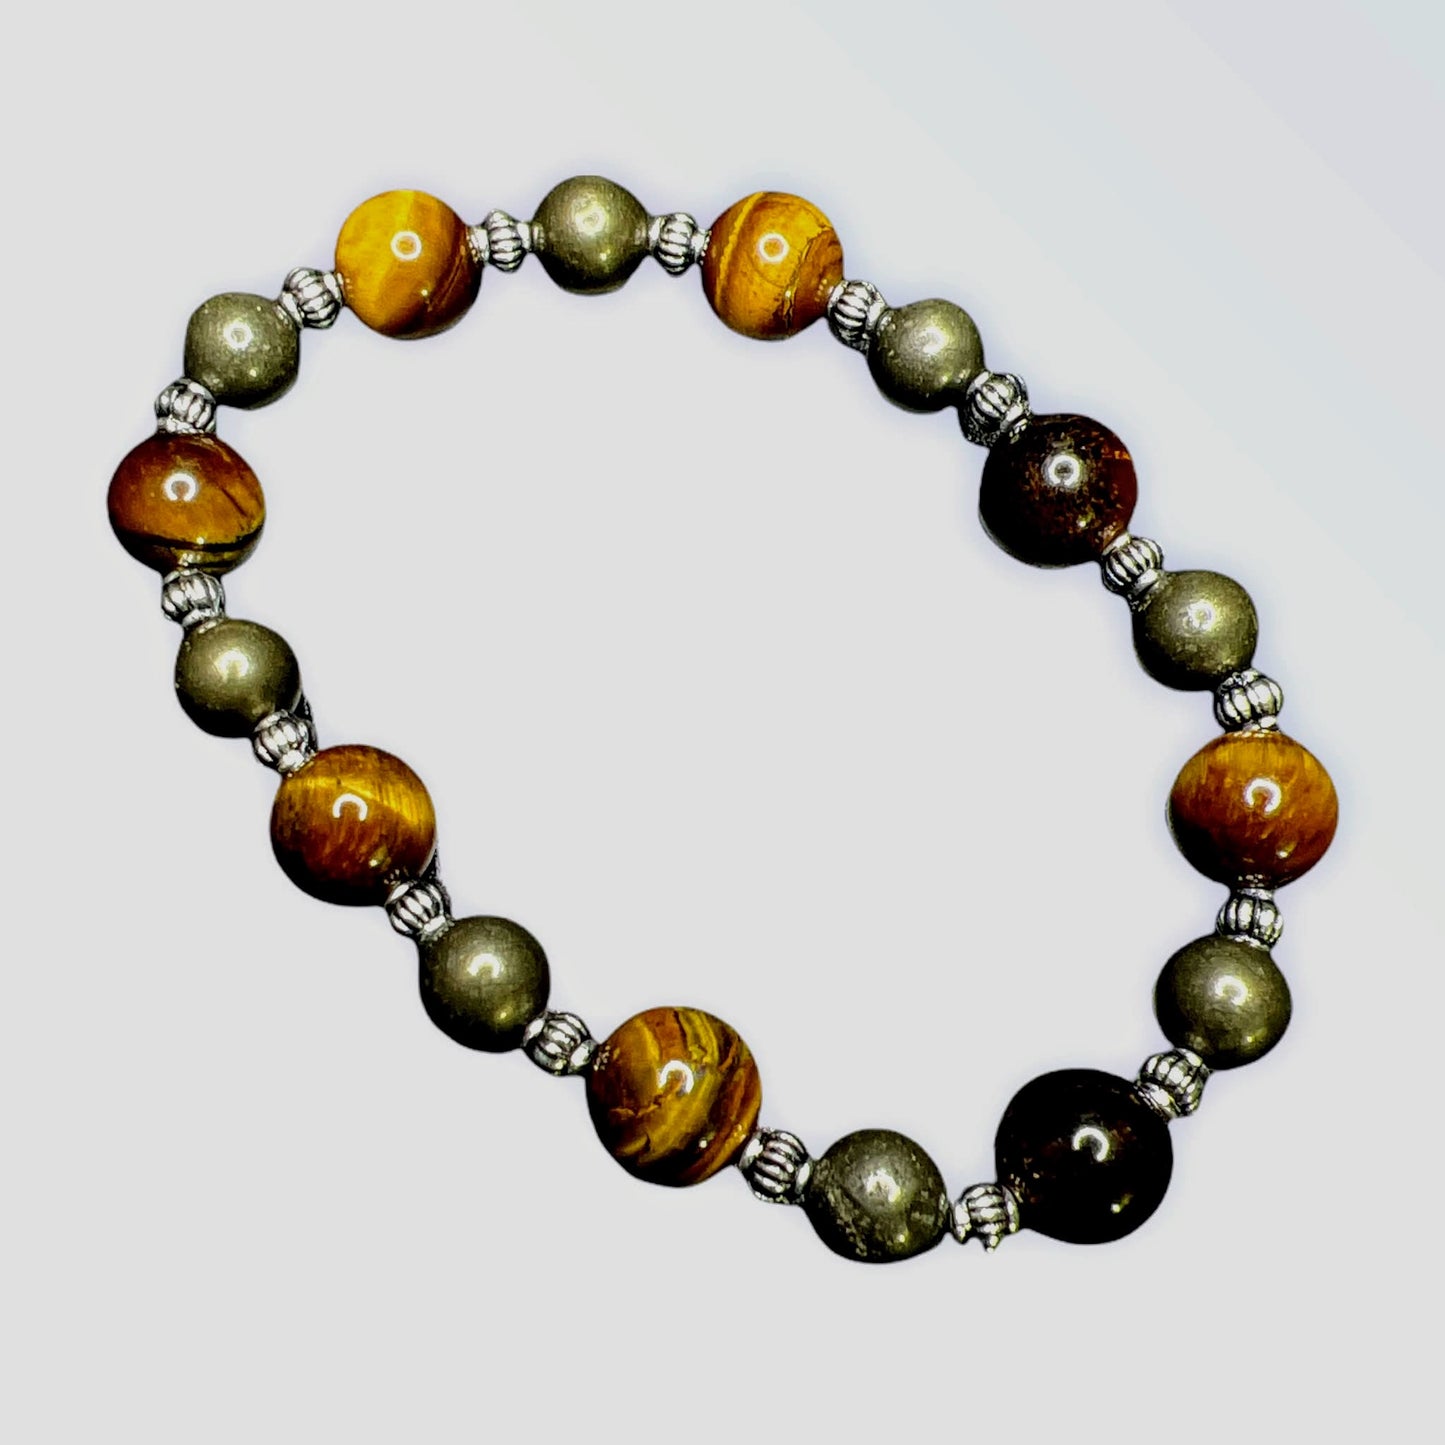 Tiger Eye-promotes vitality and physical action / Pyrite-works on the physical, etheric, and emotional levels to shield and protect from all types of bad vibrations and/or energy. It has the potential to improve both physical and mental well-being.